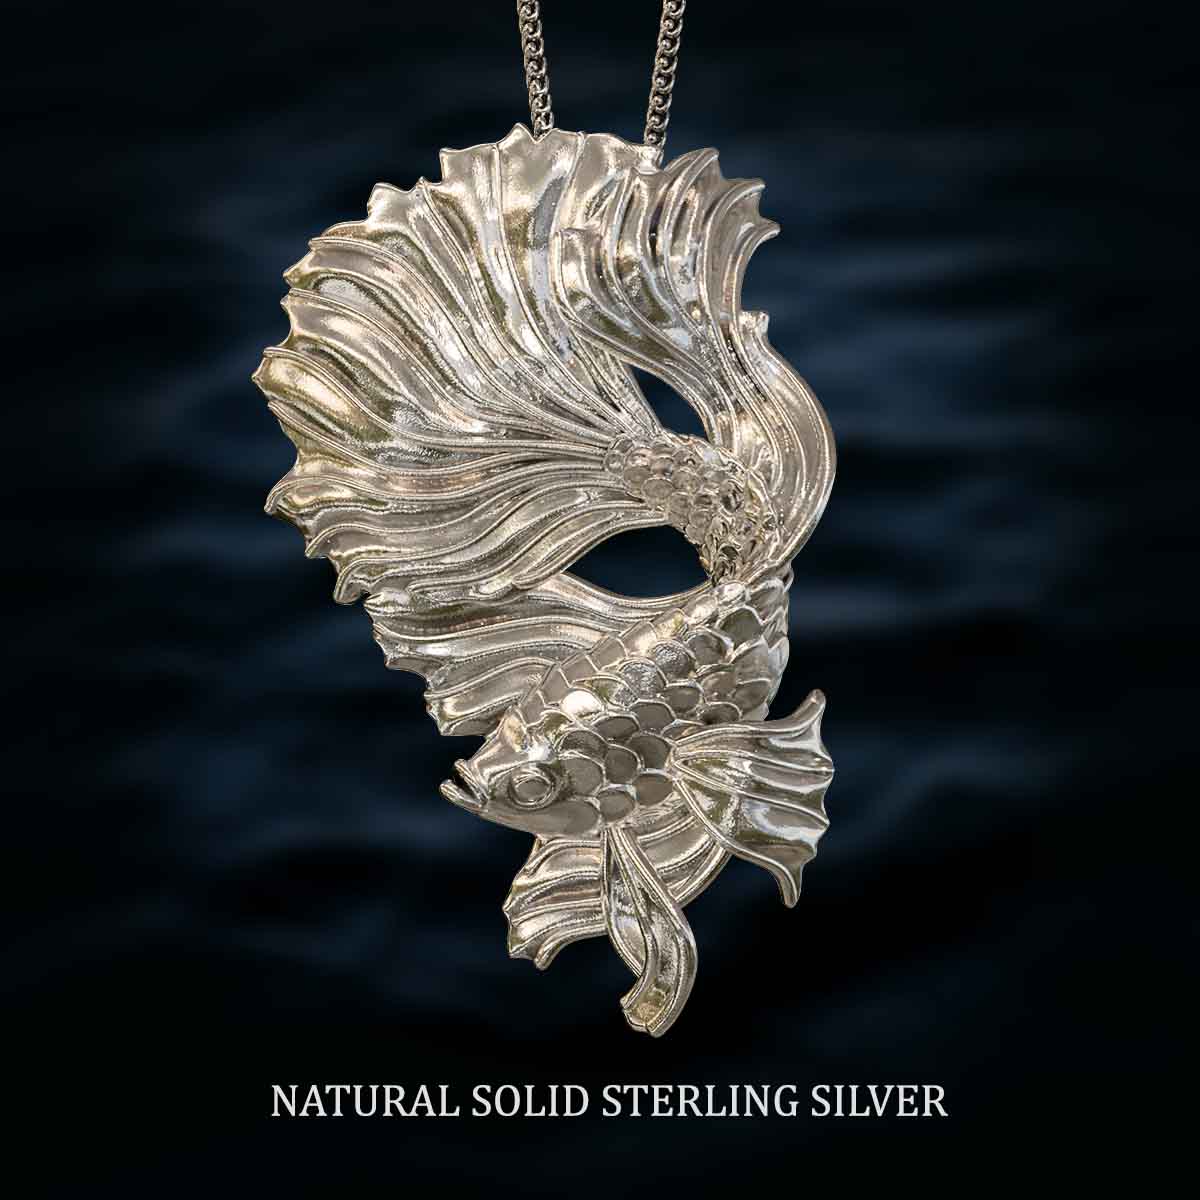     Natural-Satin-Polish-Solid-Sterling-Silver-Betta-Fish-Pendant-Jewelry-For-Necklace